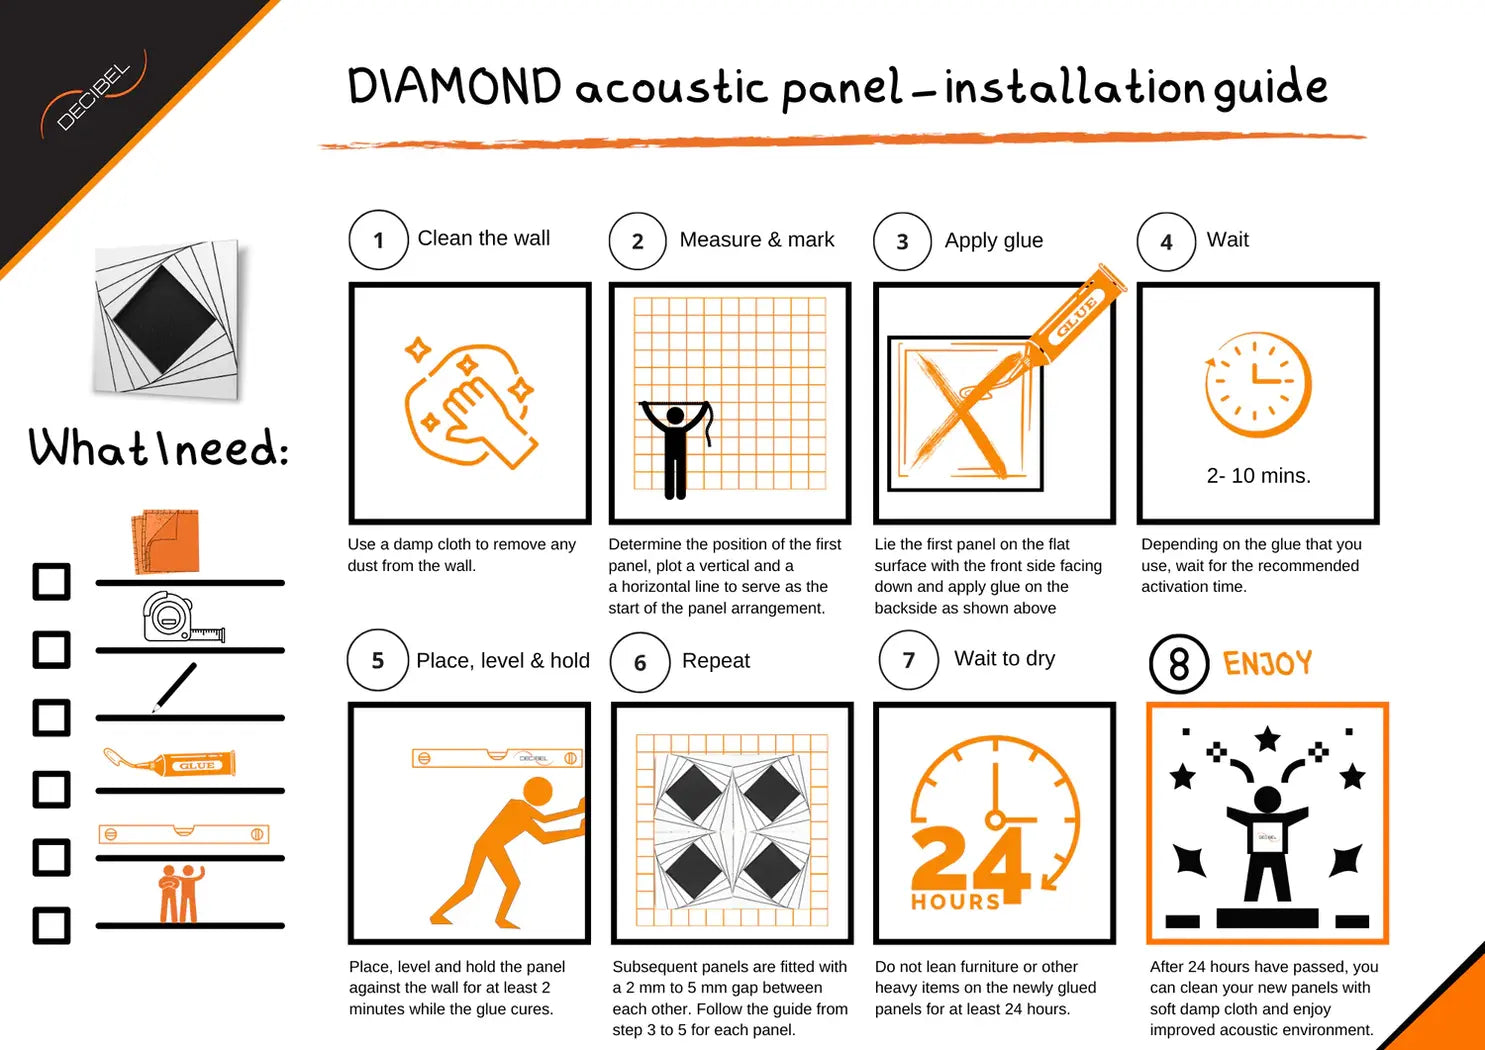 Diamond Wood acoustic sound absorbing panel installation guide